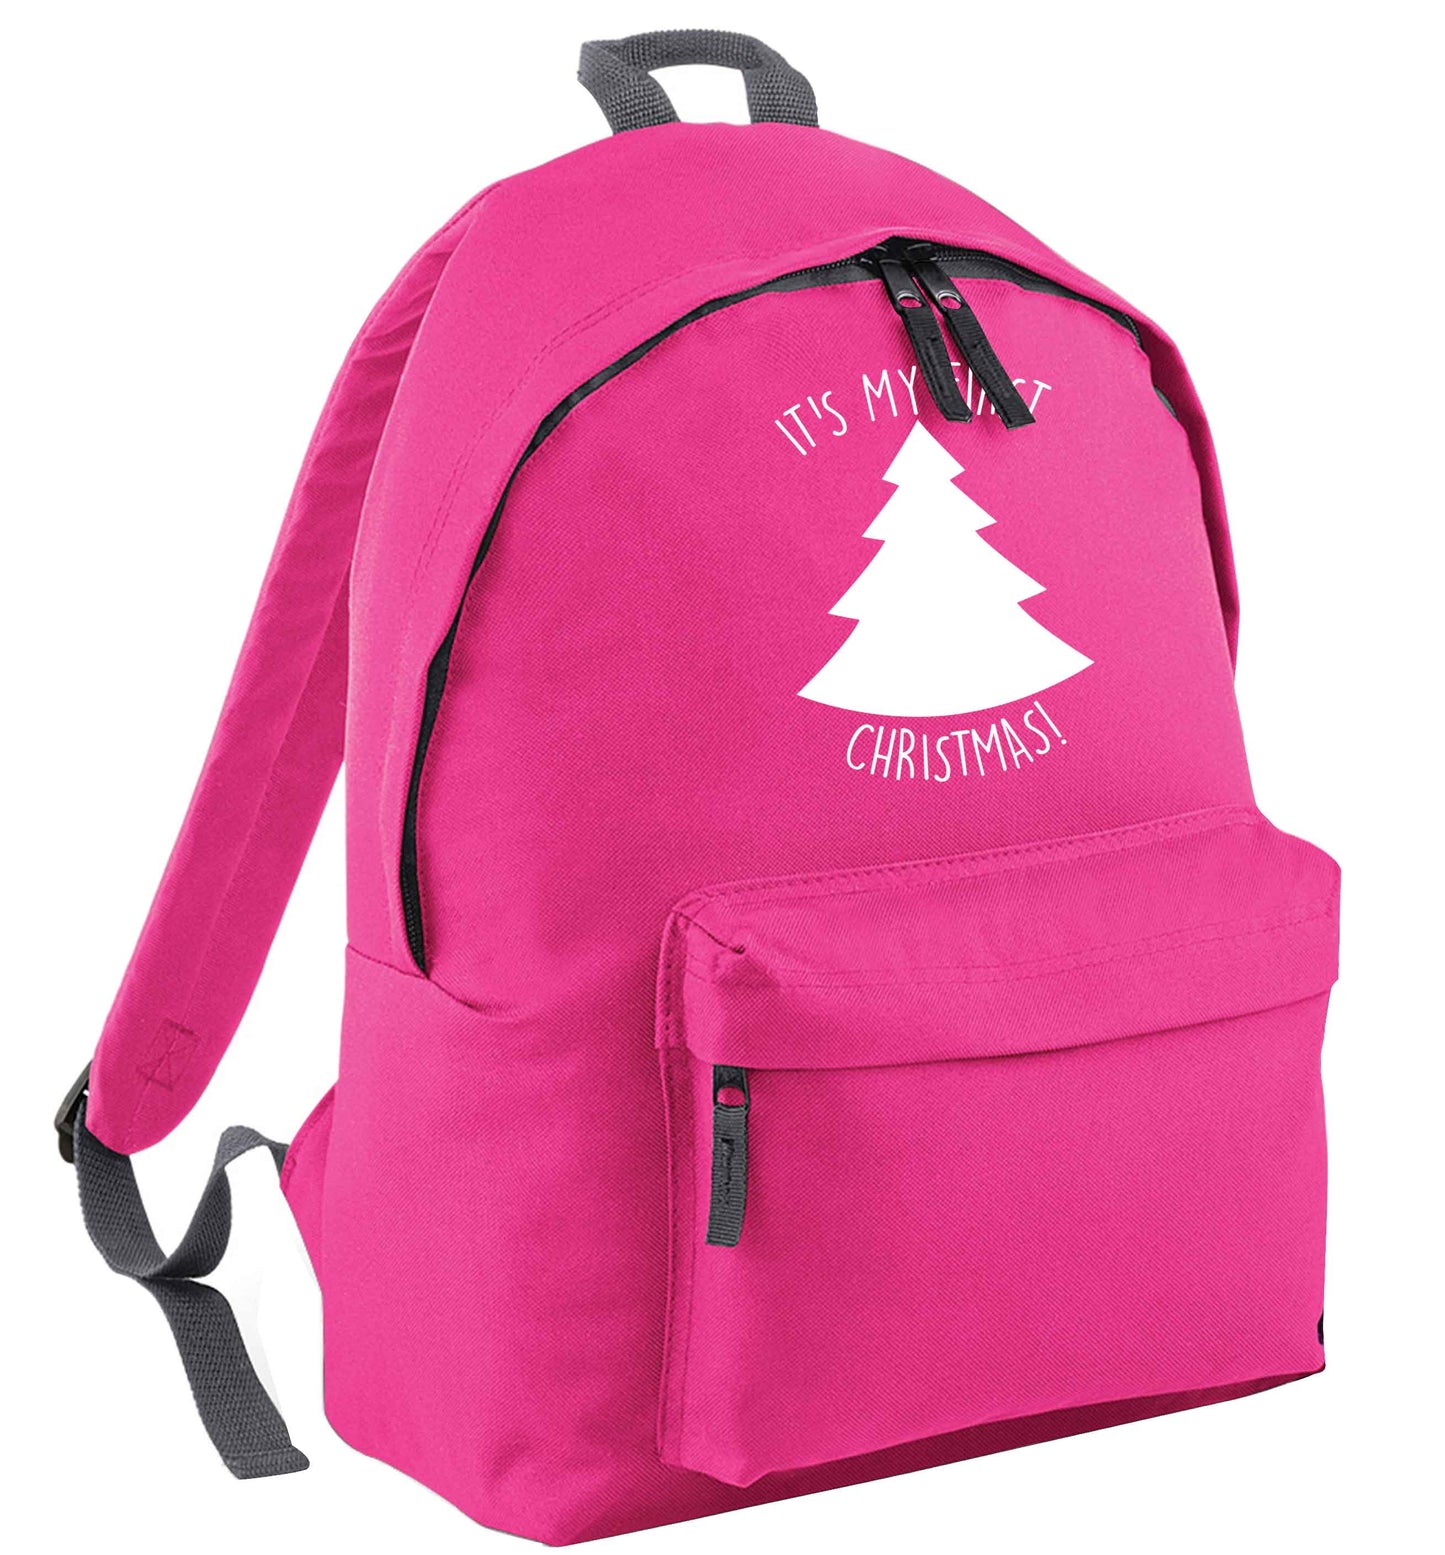 It's my first Christmas - tree pink adults backpack